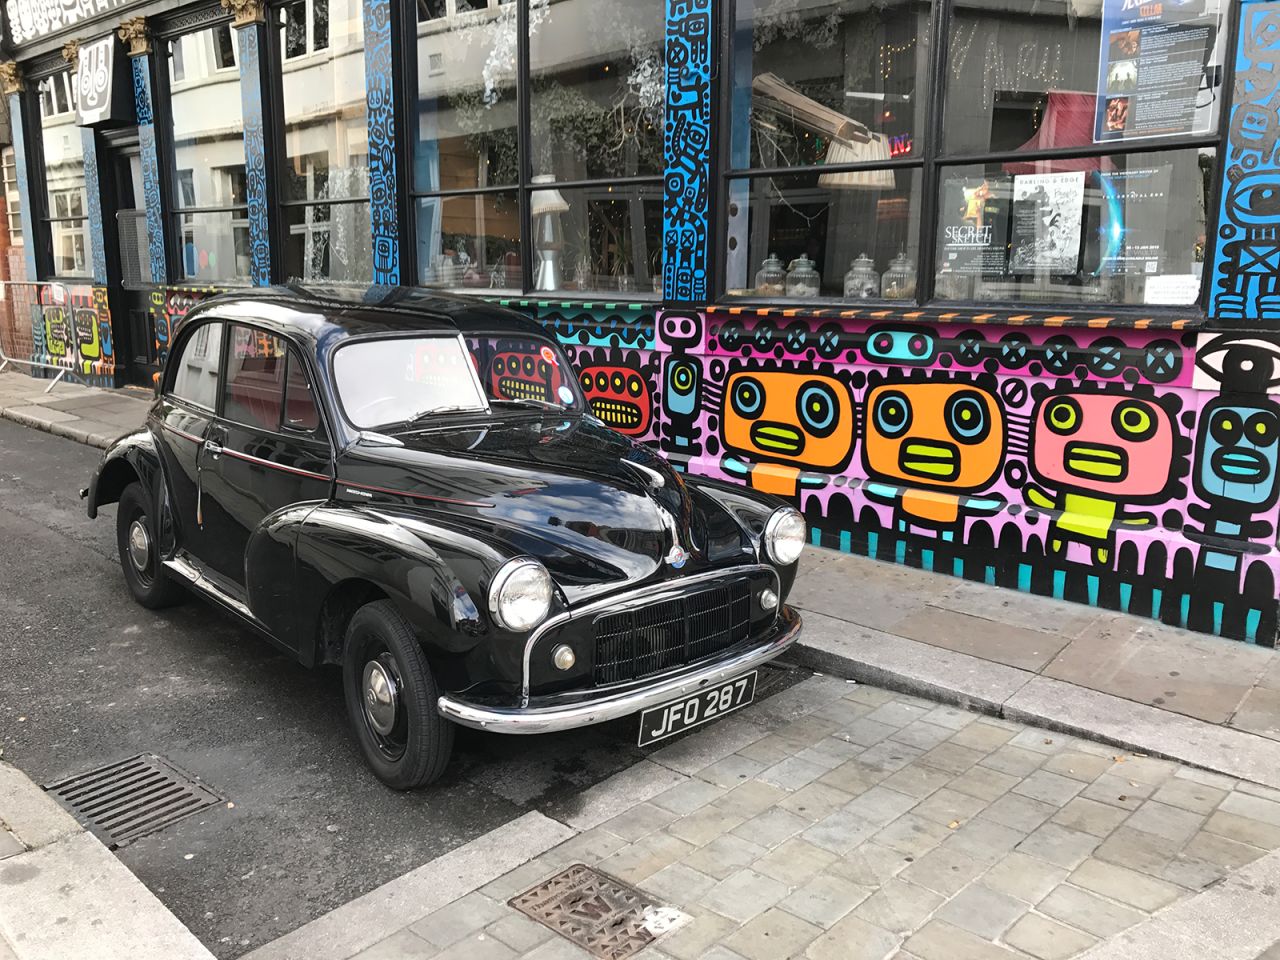 London Electric Cars is another UK-based conversion shop that hopes to make classic cars more sustainable. Matthew Quitter founded the garage in 2017 after converting his own 1953 Morris Minor (pictured).